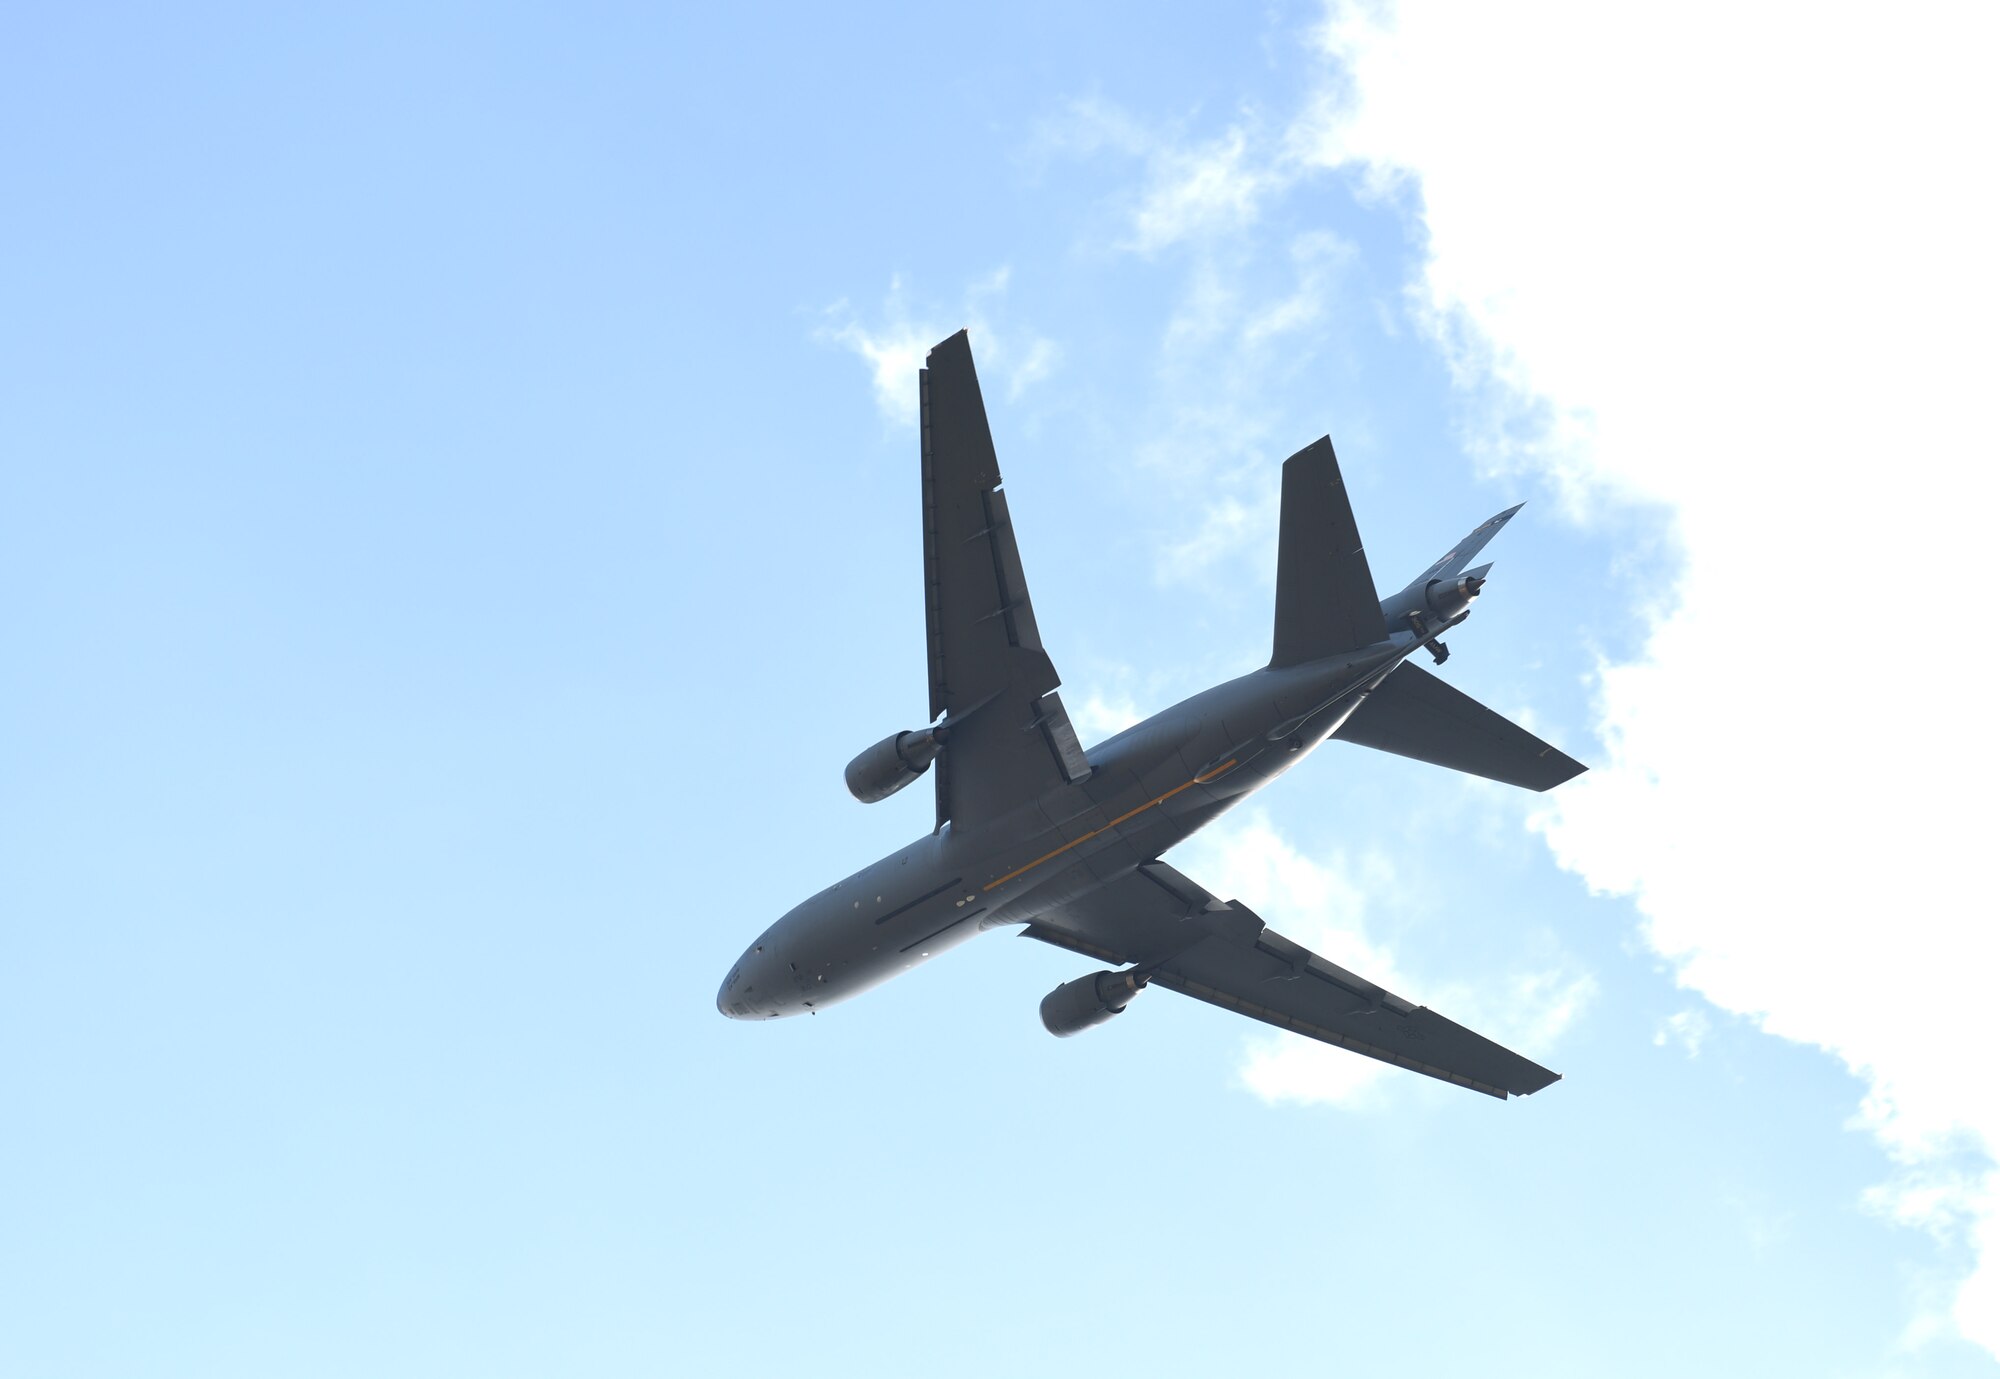 A U.S. Air Force KC-10 Extender aircraft assigned to the 305th Air Mobility Wing, Joint Base McGuire-Dix-Lakehurst, N.J., flies over Royal Air Force Mildenhall, England, March 9, 2022. The KC-10 is an Air Mobility Command advanced tanker and cargo aircraft designed to provide increased global mobility for U.S. Armed Forces. (U.S. Air Force photo by Karen Abeyasekere)